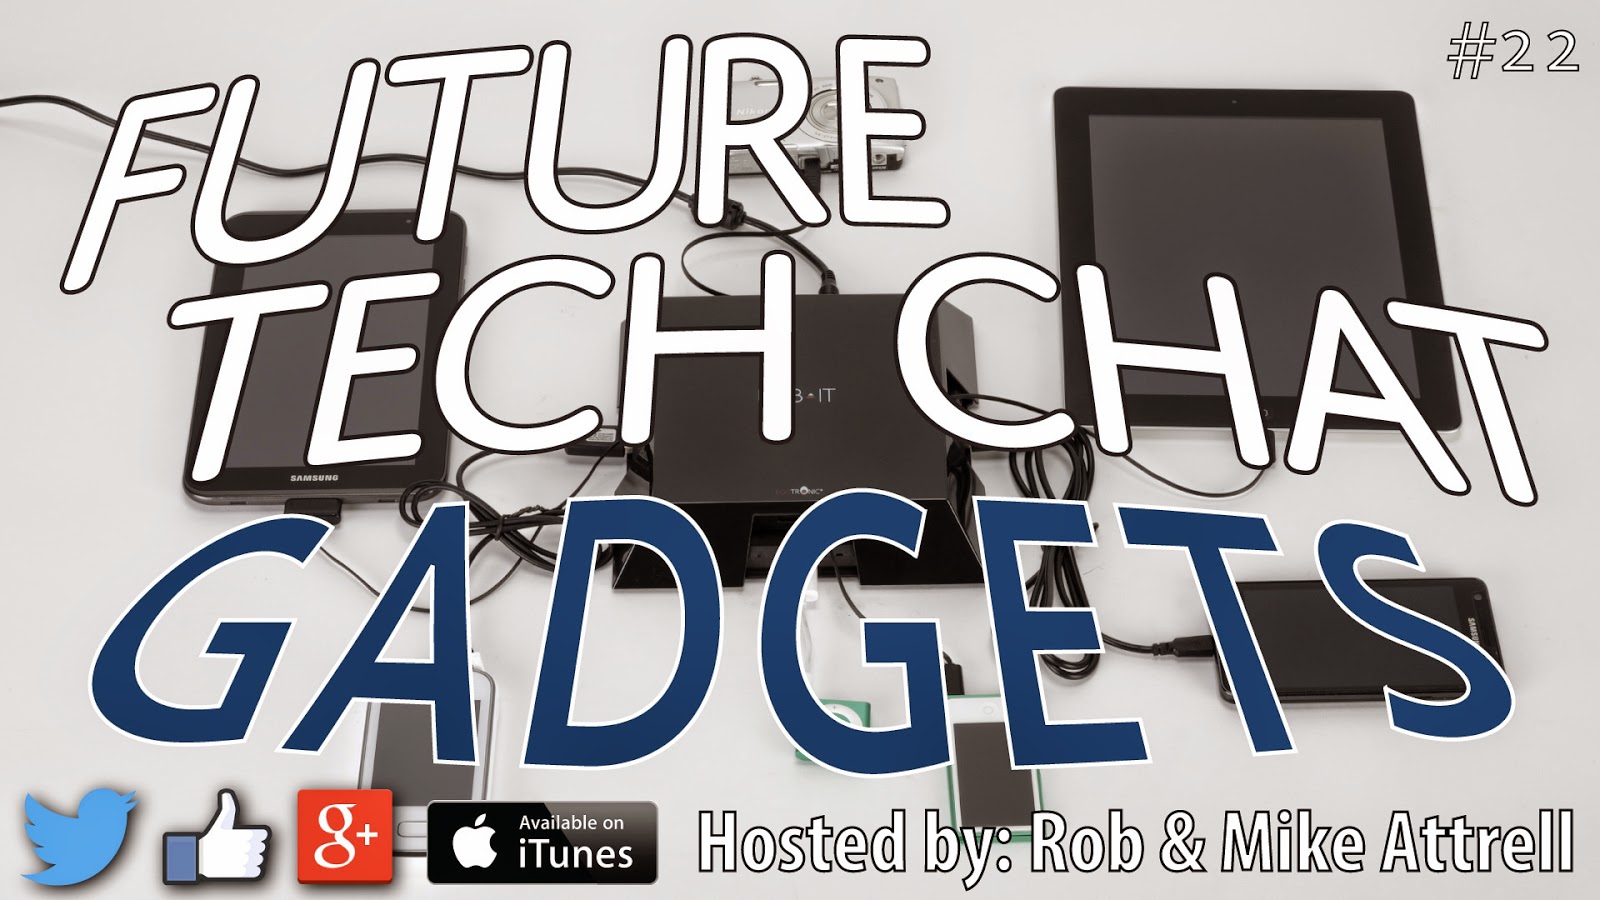 Future Tech Chat #22: All the Gadgets!